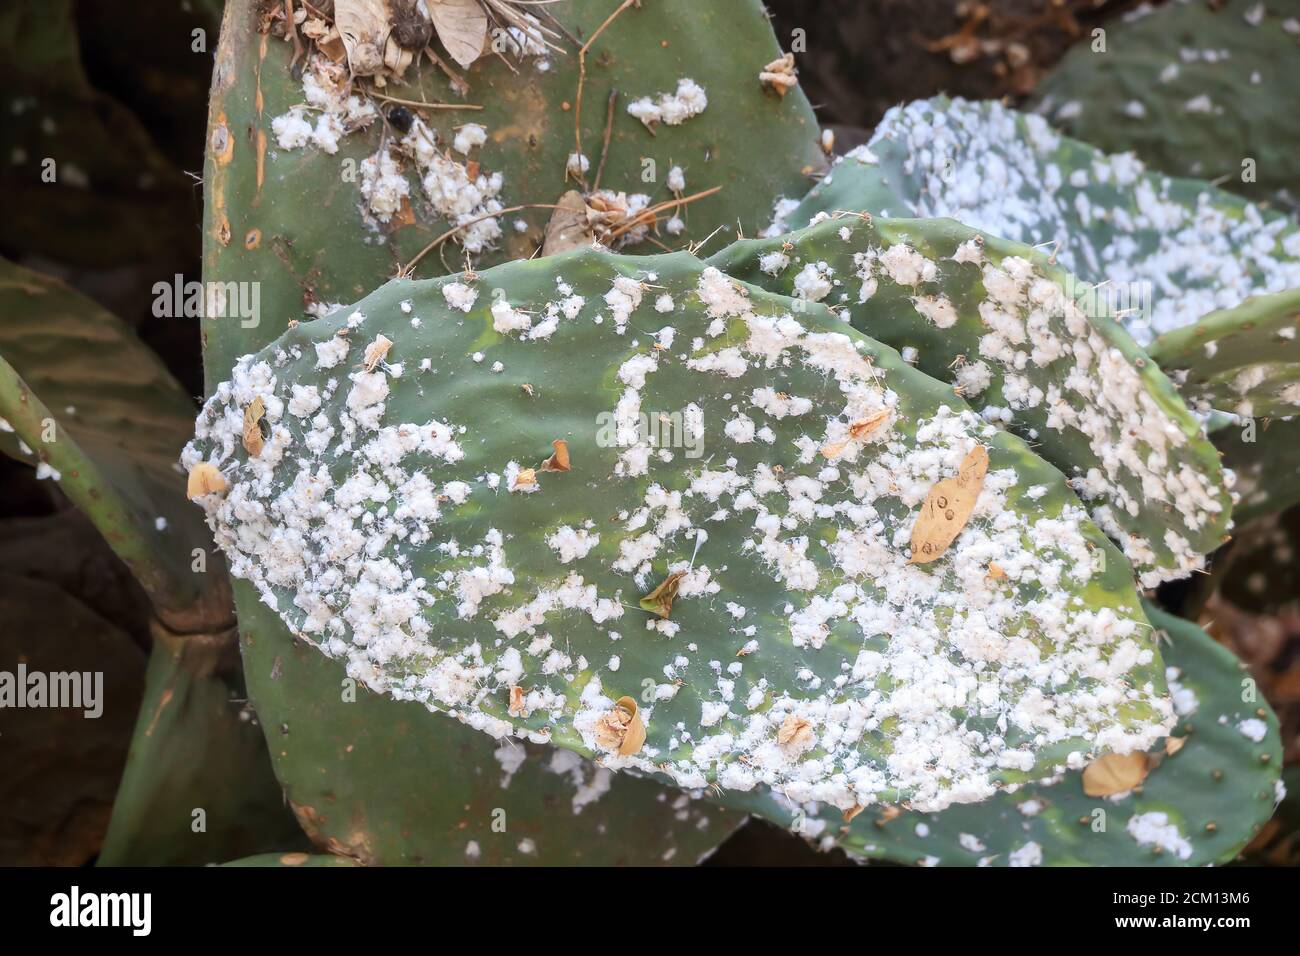 Macro photography of Prickly pears with a cochineal infestation. Shallow depth of field Stock Photo